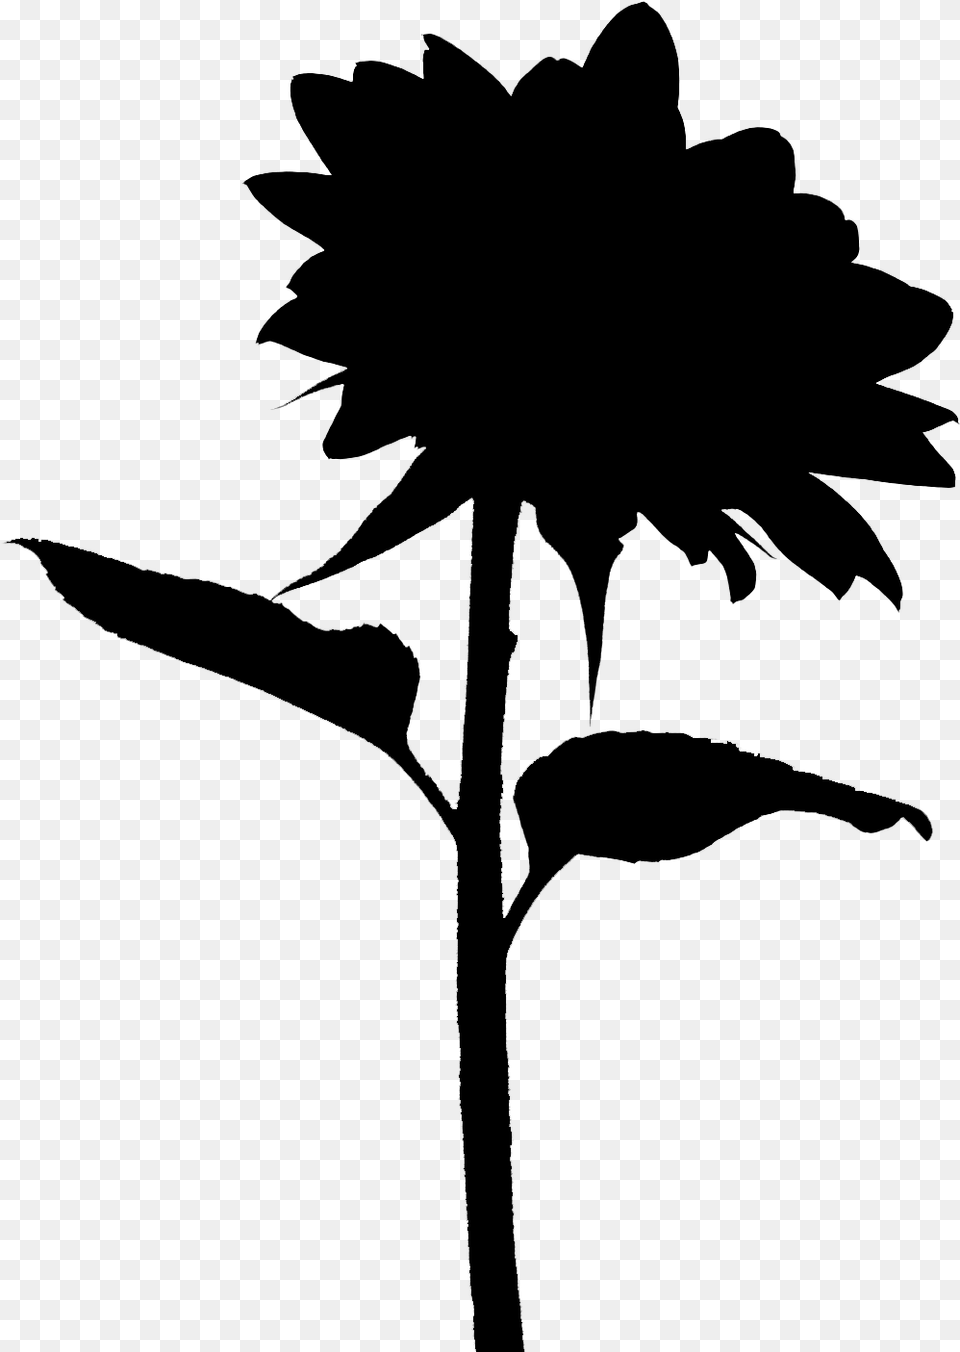 Sunflower Silhouette Transparent Background Sunflower, Gray Free Png